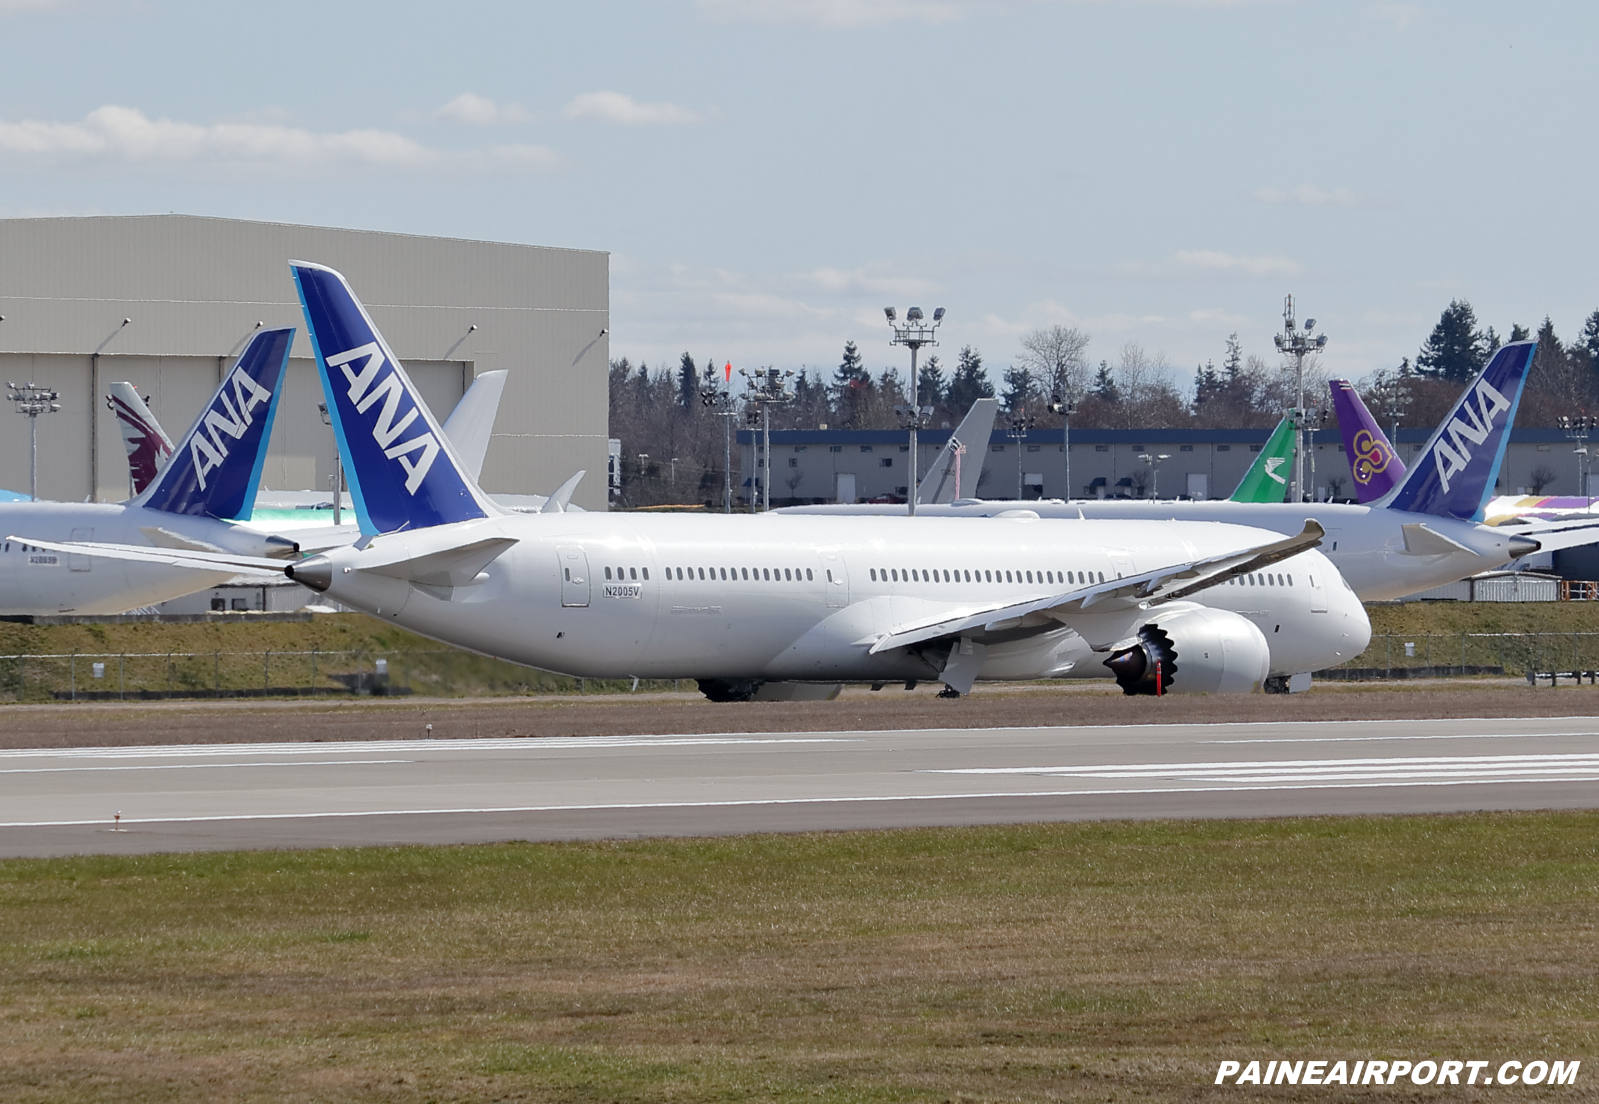 ANA 787-9 line 1095 at KPAE Paine Field